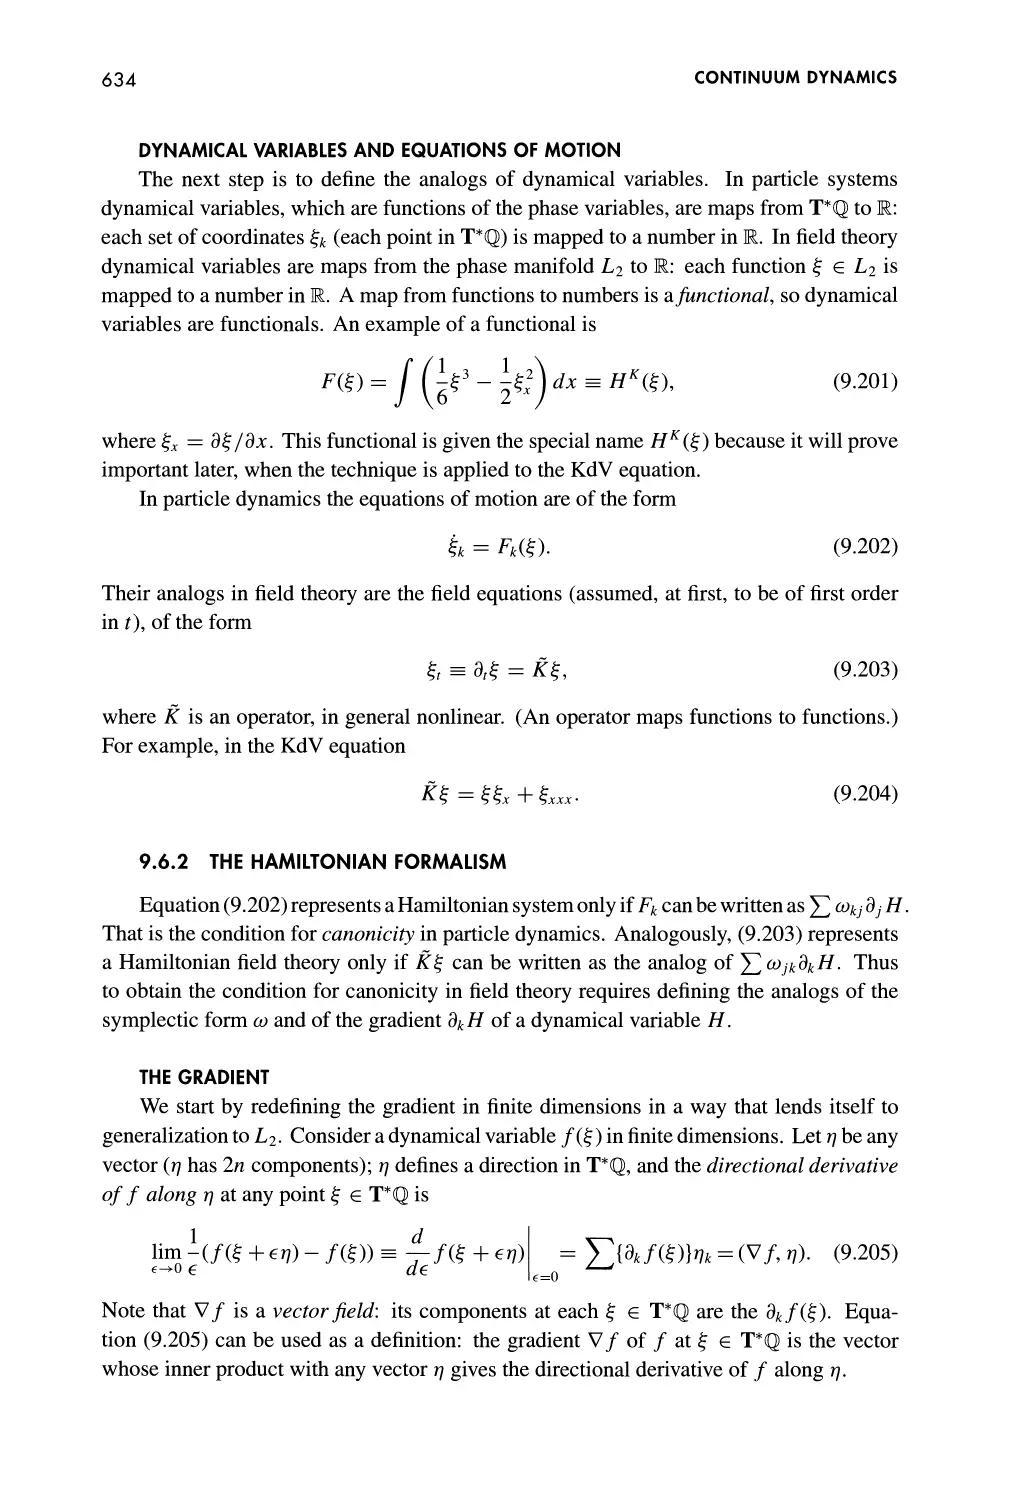 Dynamical Variables and Equations of Motion
9.6.2 The Hamiltonian Formalism